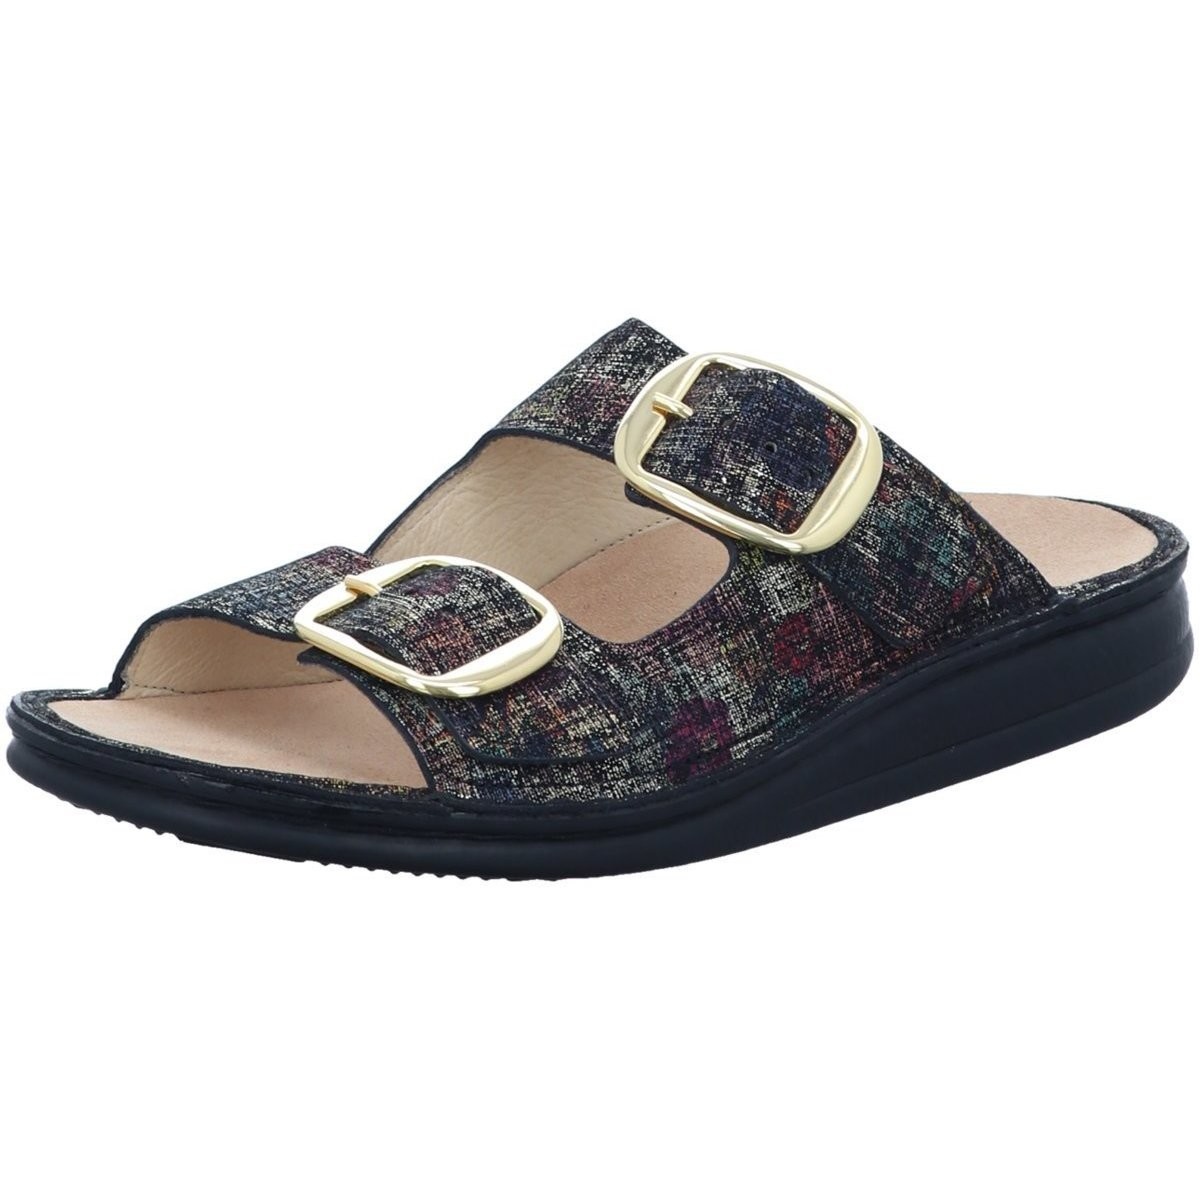 Chaussures Femme Paul Smith Homme  Multicolore